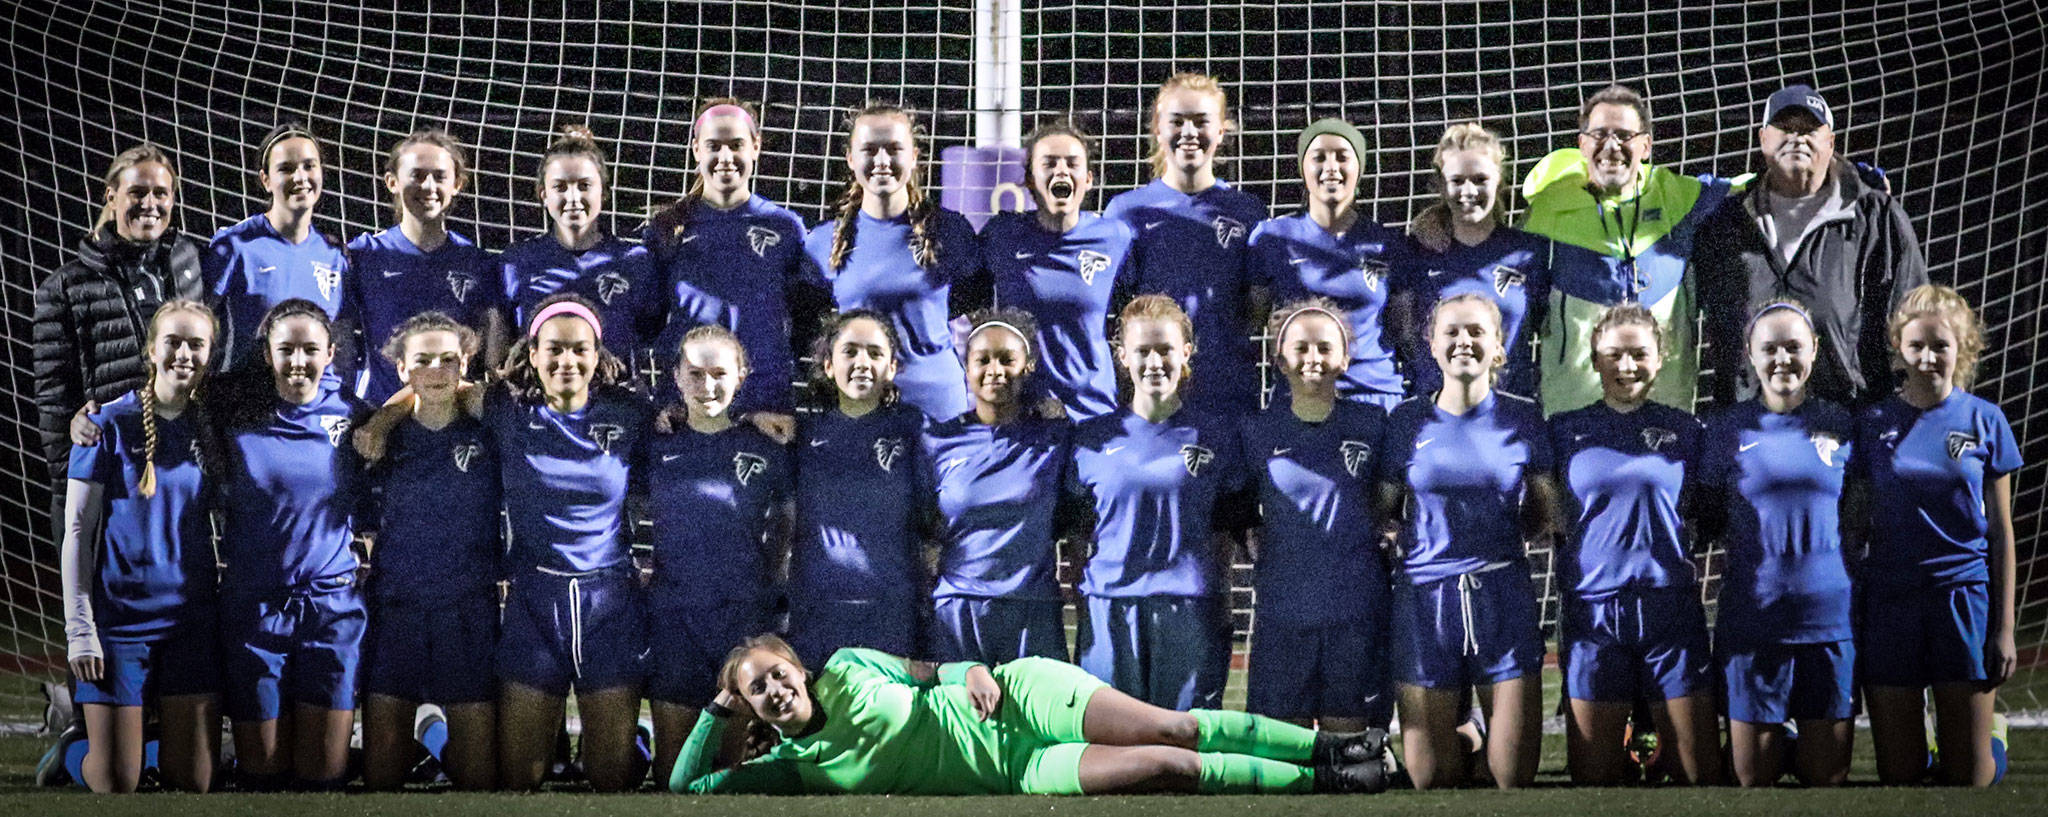 The state-bound South Whidbey High School soccer team — front row: Nicole Helseth; second row, left to right: Sidney Ollis, Kelly Murnane, Abby Amundson, Simone White, Kailey Ricketts, Nikki Murnane, Leniece Gonzales, Elizabeth Haines, Maddy Racicot, Adeline McCleary, Ruby Bond, Mallory Drye, Claire Philp; back row: Anne Haines, Lily Farnham, Ashley Ricketts, Karyna Hezel, Samantha Ollis, Adeline McCleary, Alison Papritz, Juliana Larson-Wickman, Ashton Helseth, Mikenna Wicher, Terry Swanson, Rob Hinkelman.